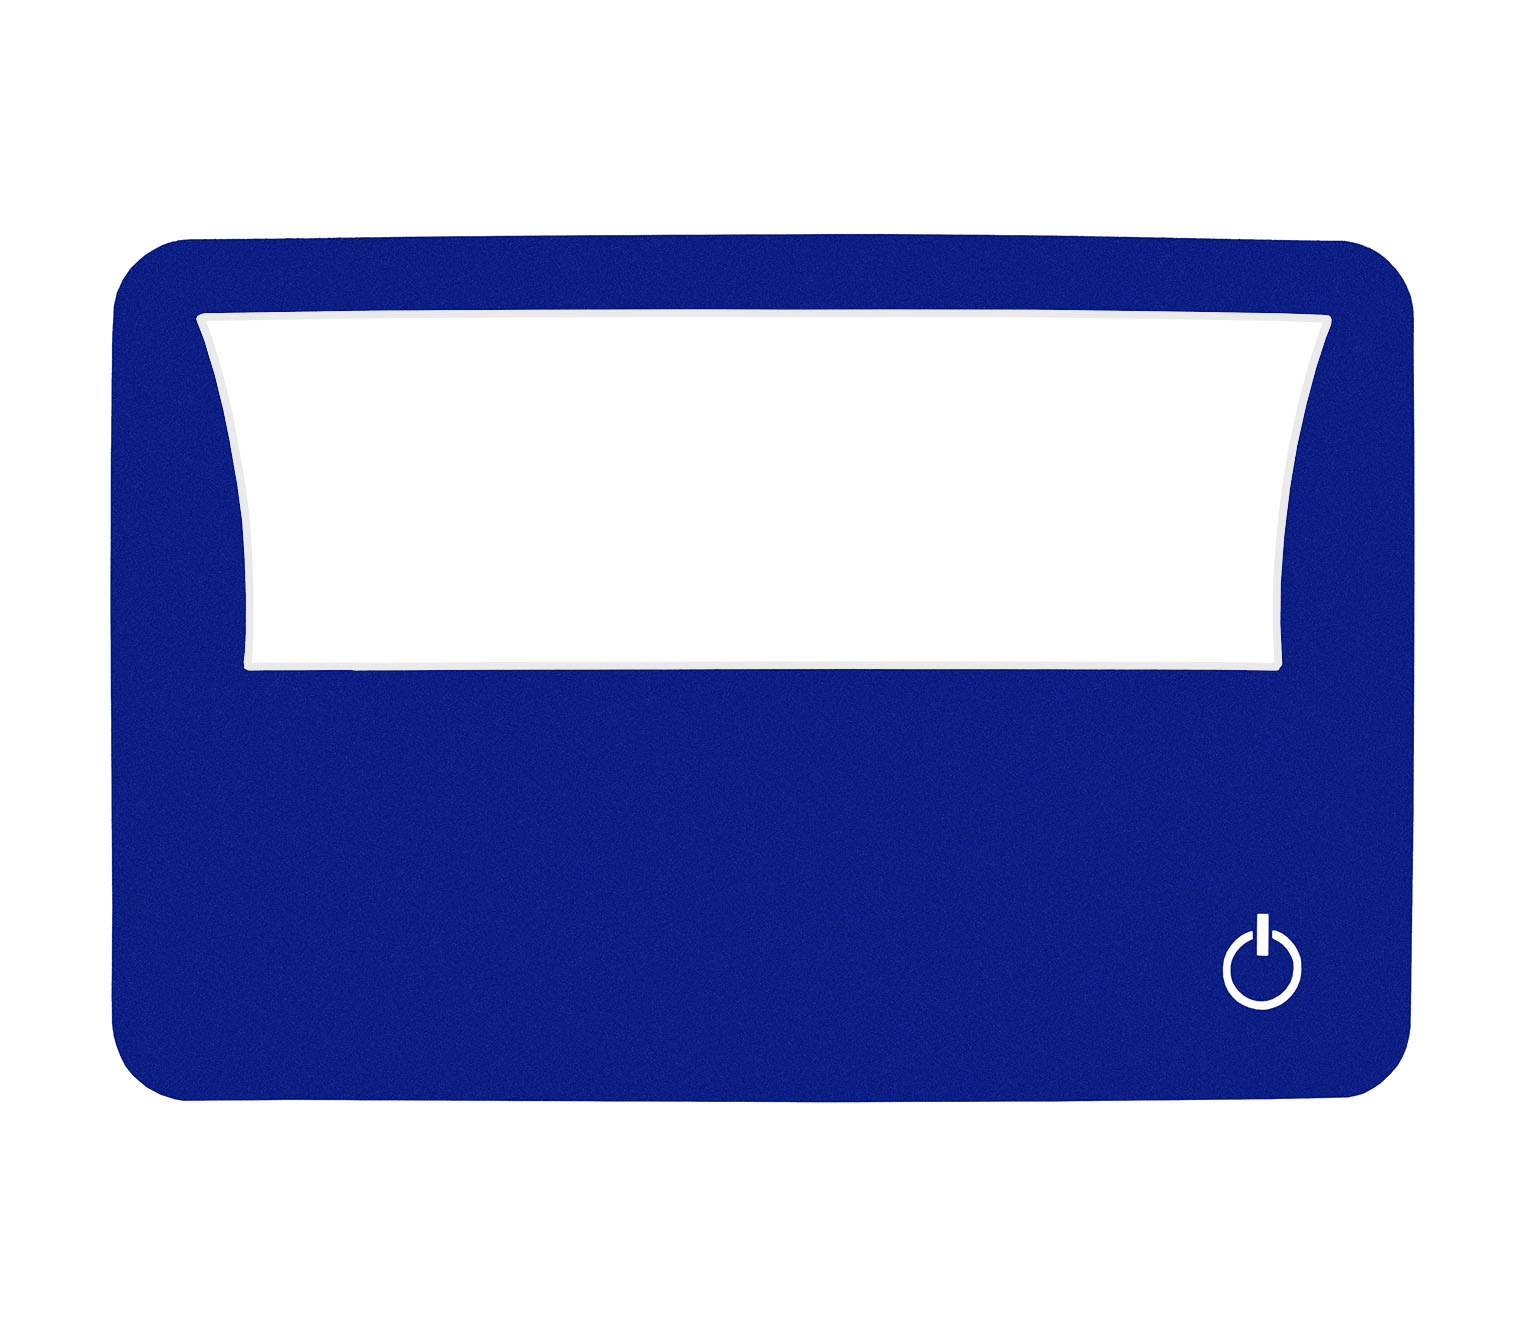 Main Image (Angle) - Wallet Magnifier (LED-Blue) Wallet Magnifiers Accessories